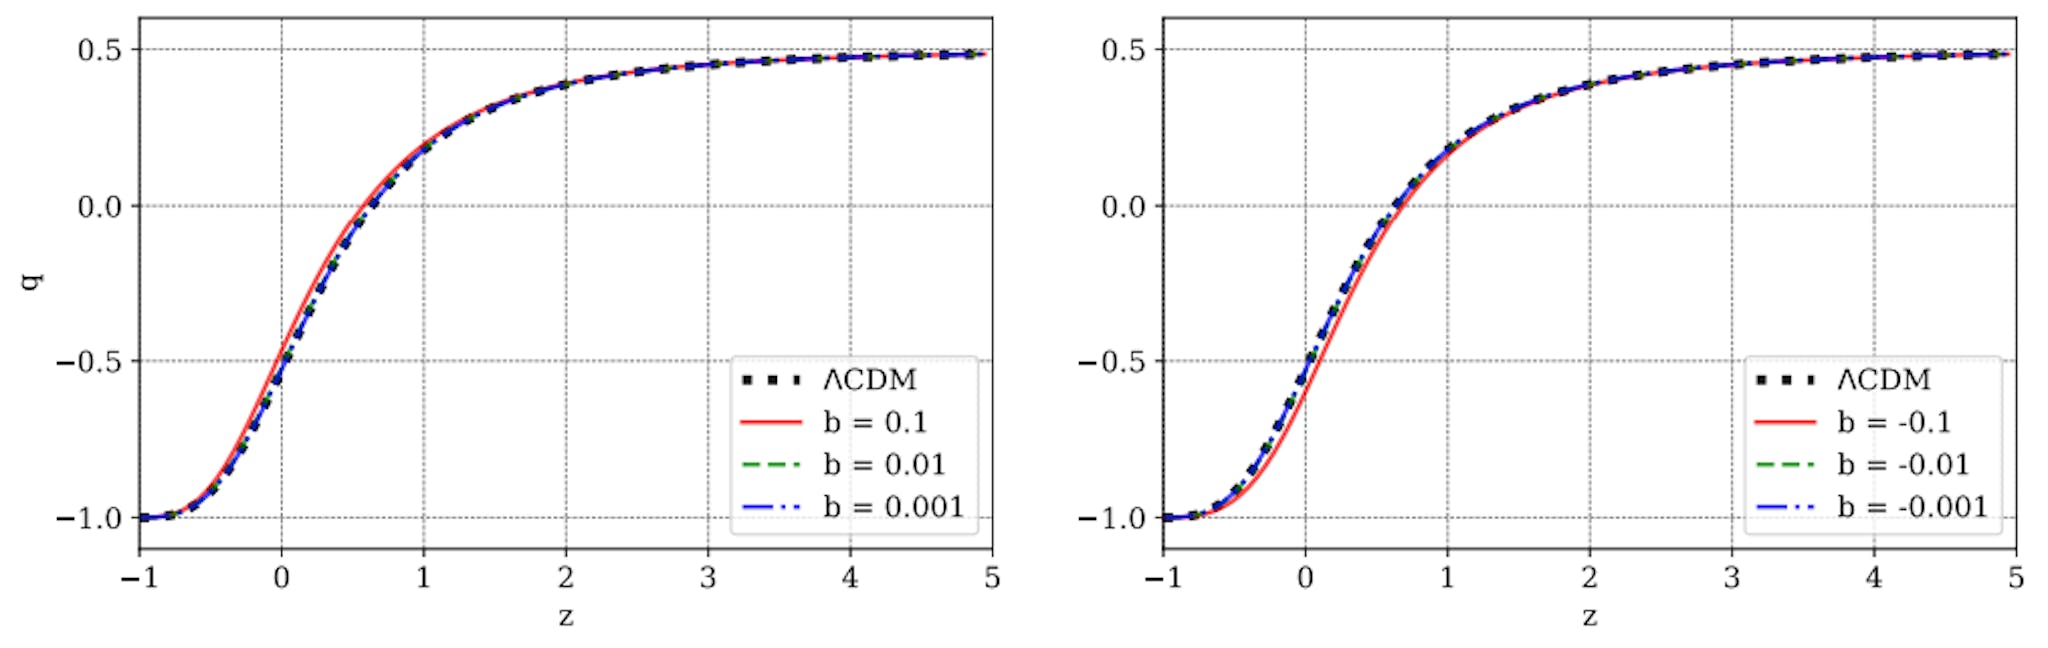 Figure 2: Plot for q vs. z using positive (left) and negative (right) values for the parameter b